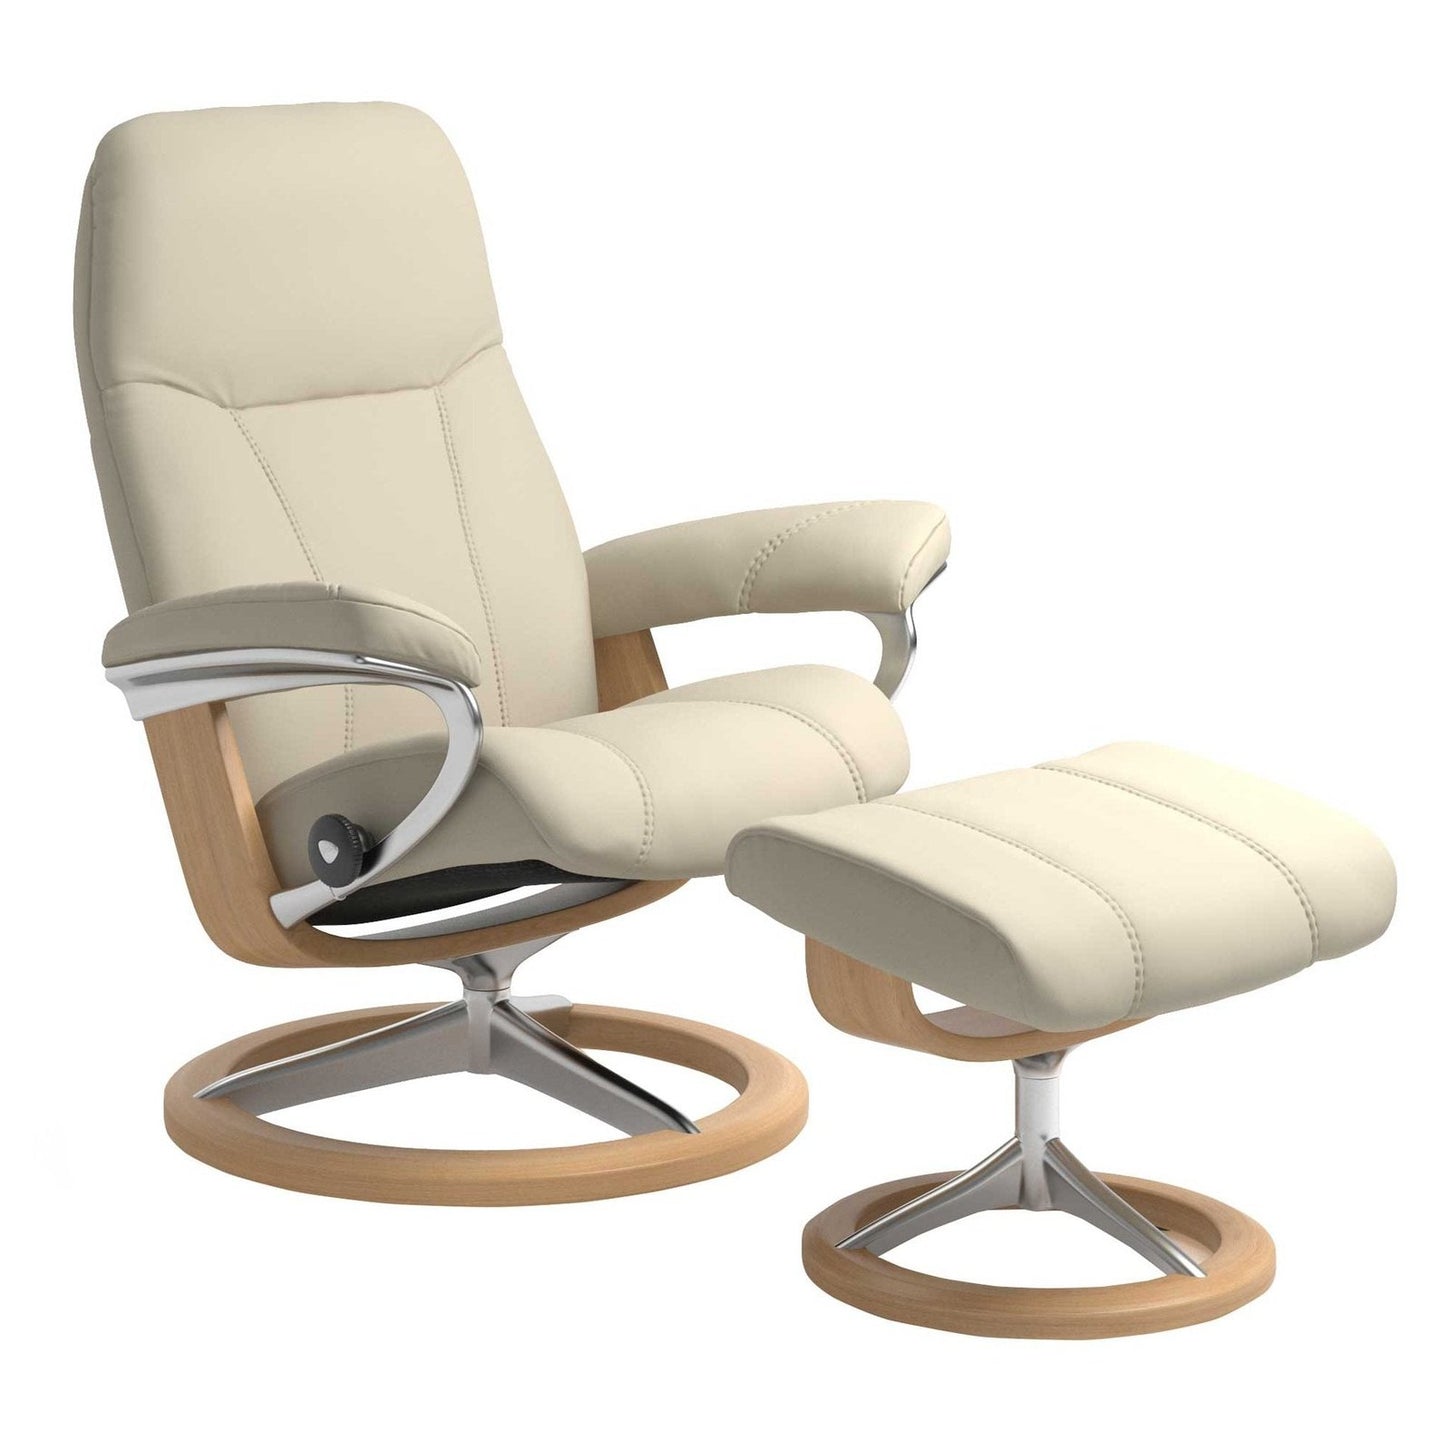 Stressless Consul Large Signature Base Recliner with Stool SPECIAL OFFER